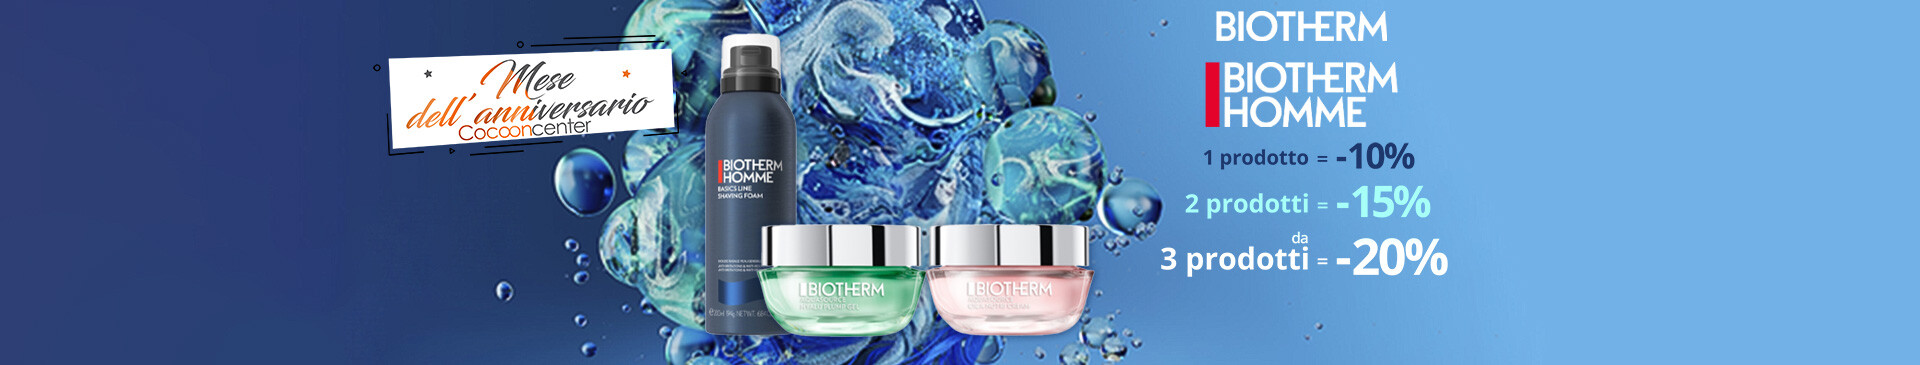 Biotherm & Biotherm Homme